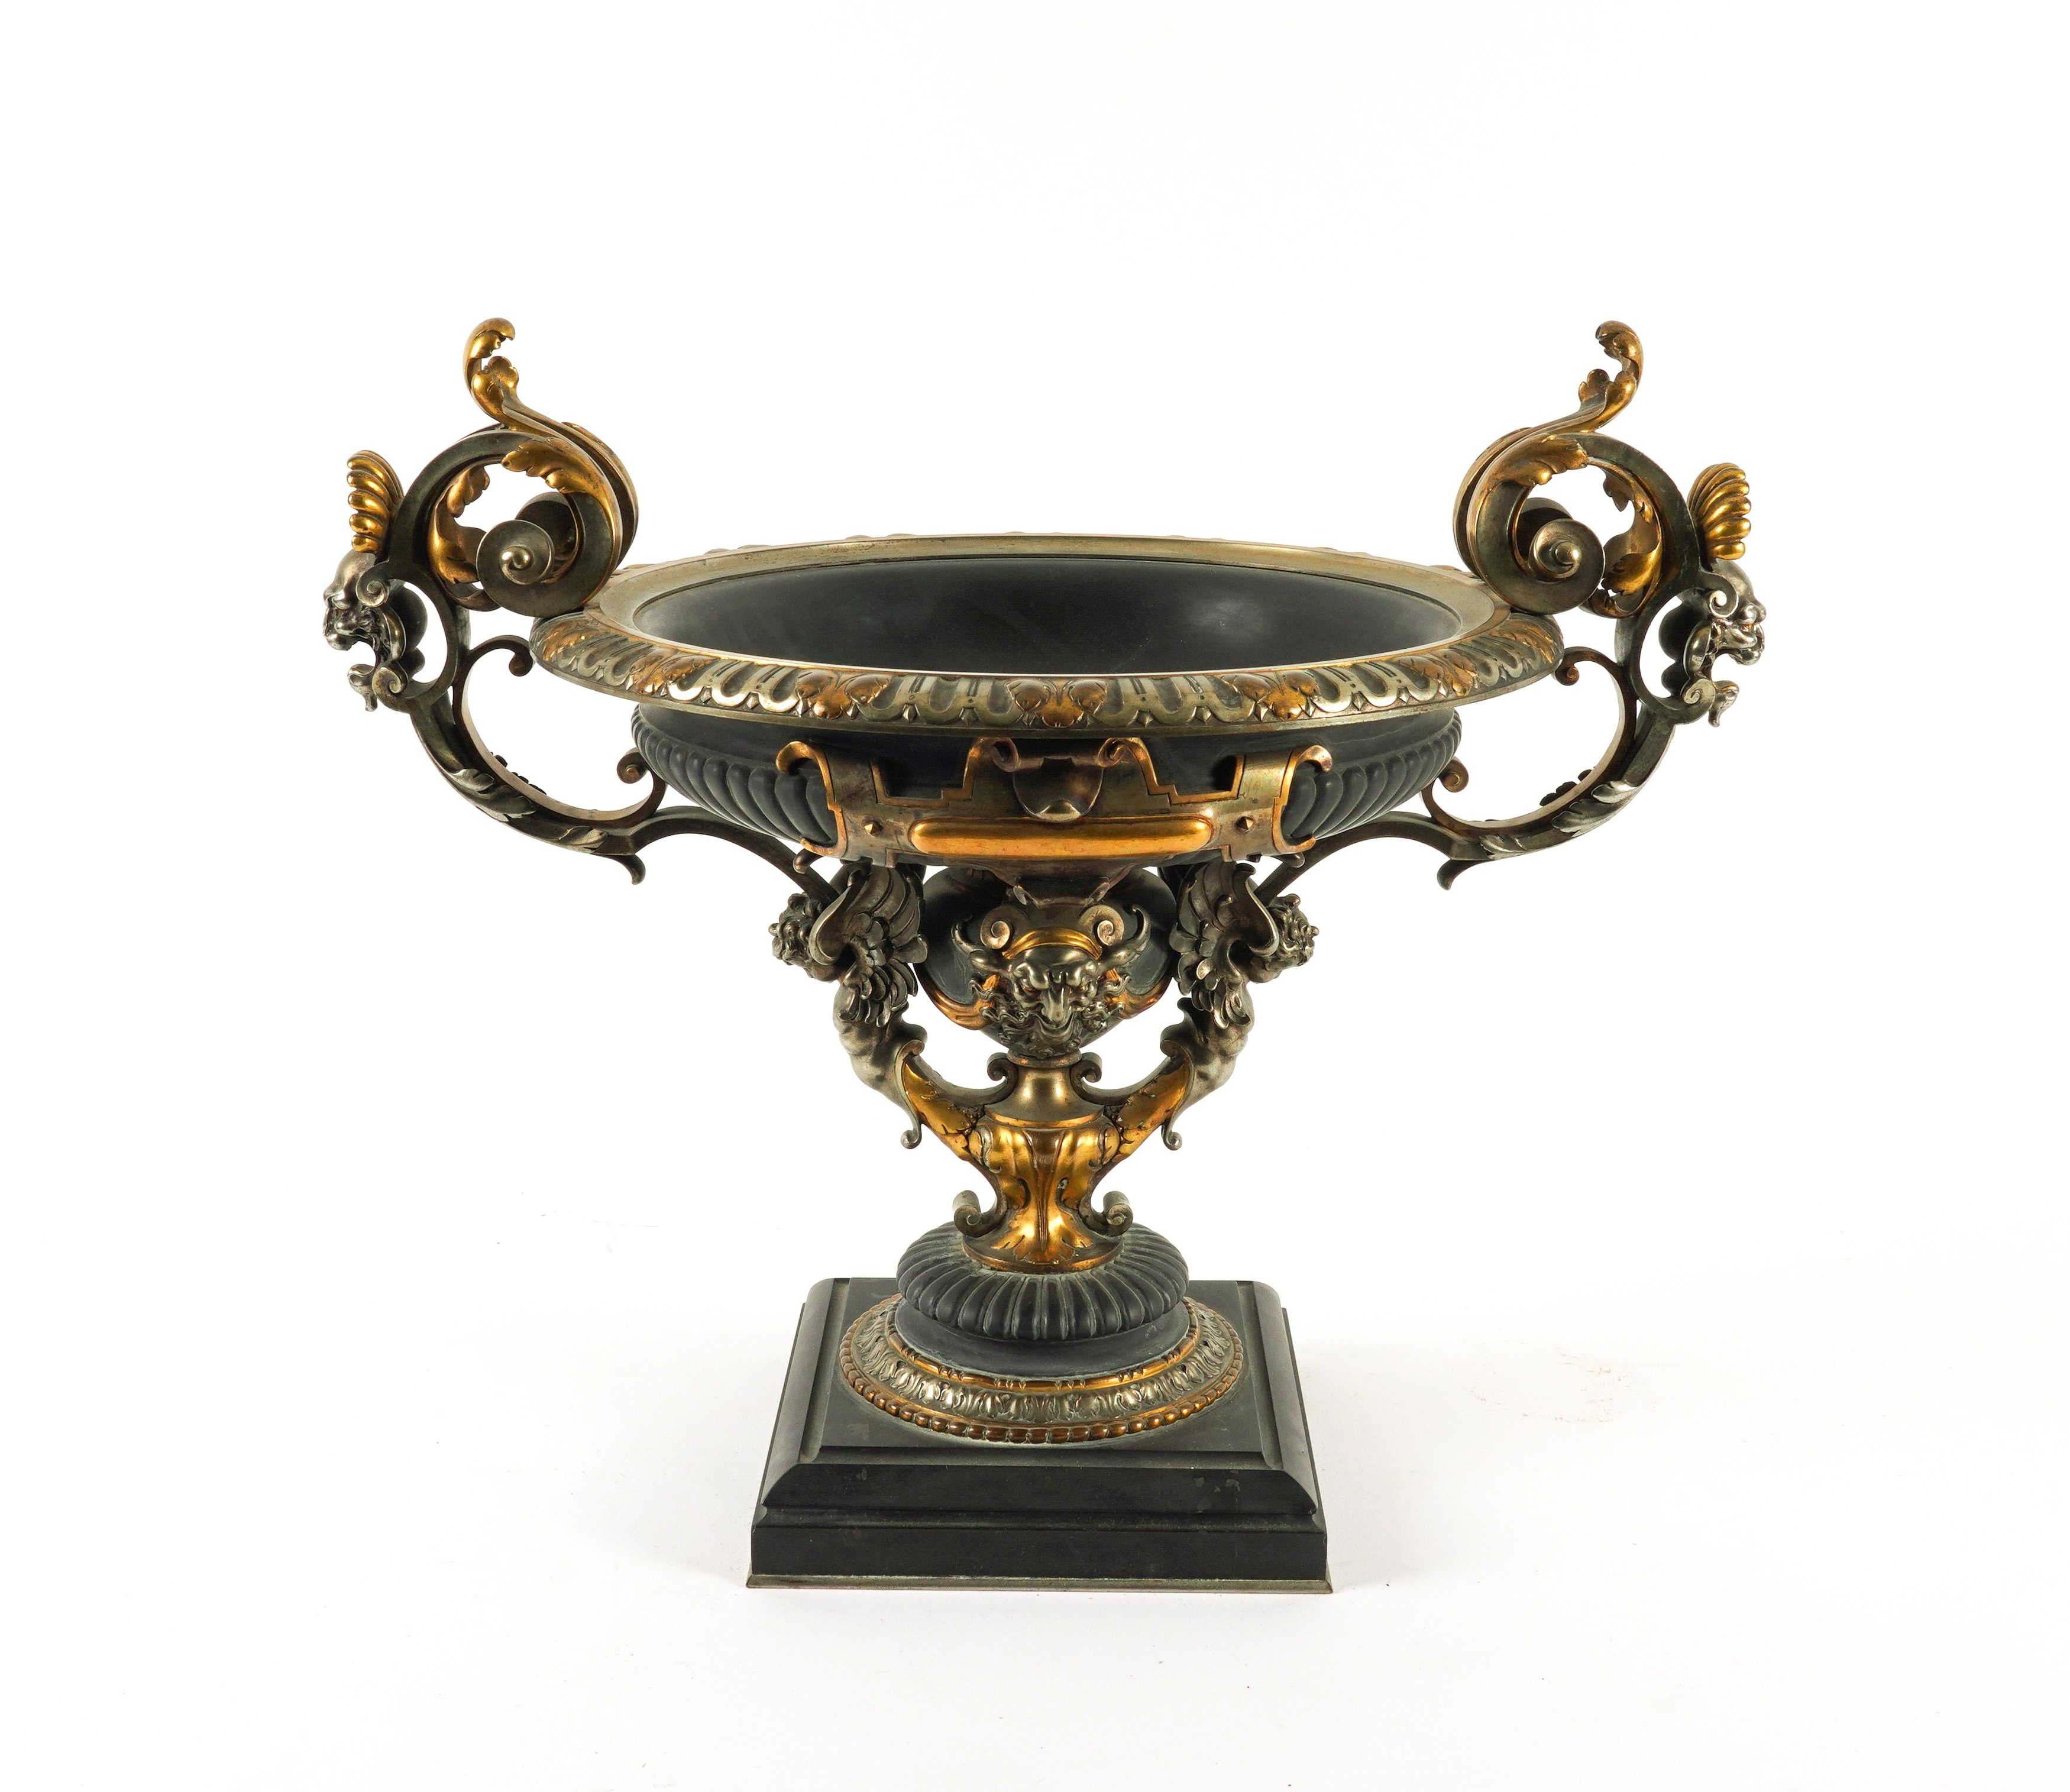 FERDINAND BARBEDIENNE, PARIS: A FRENCH GILT AND SILVERED BRONZE TWIN HANDLED TAZZA